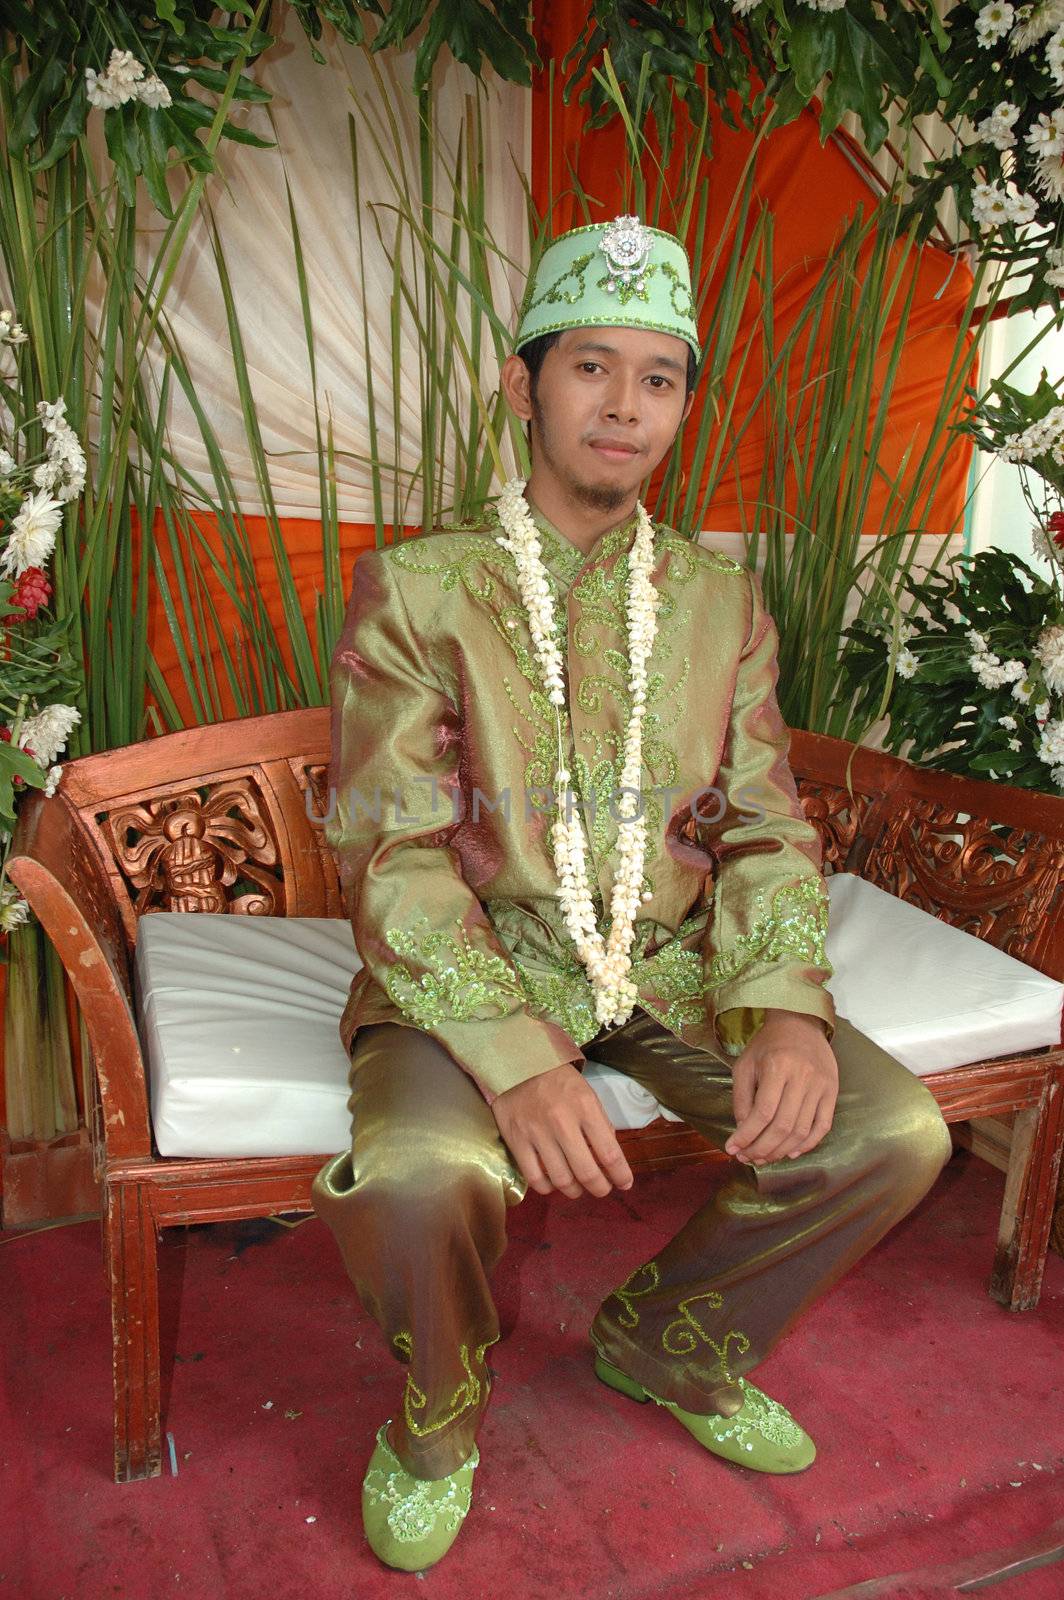 groom wearing traditional costume from west java-indonesia